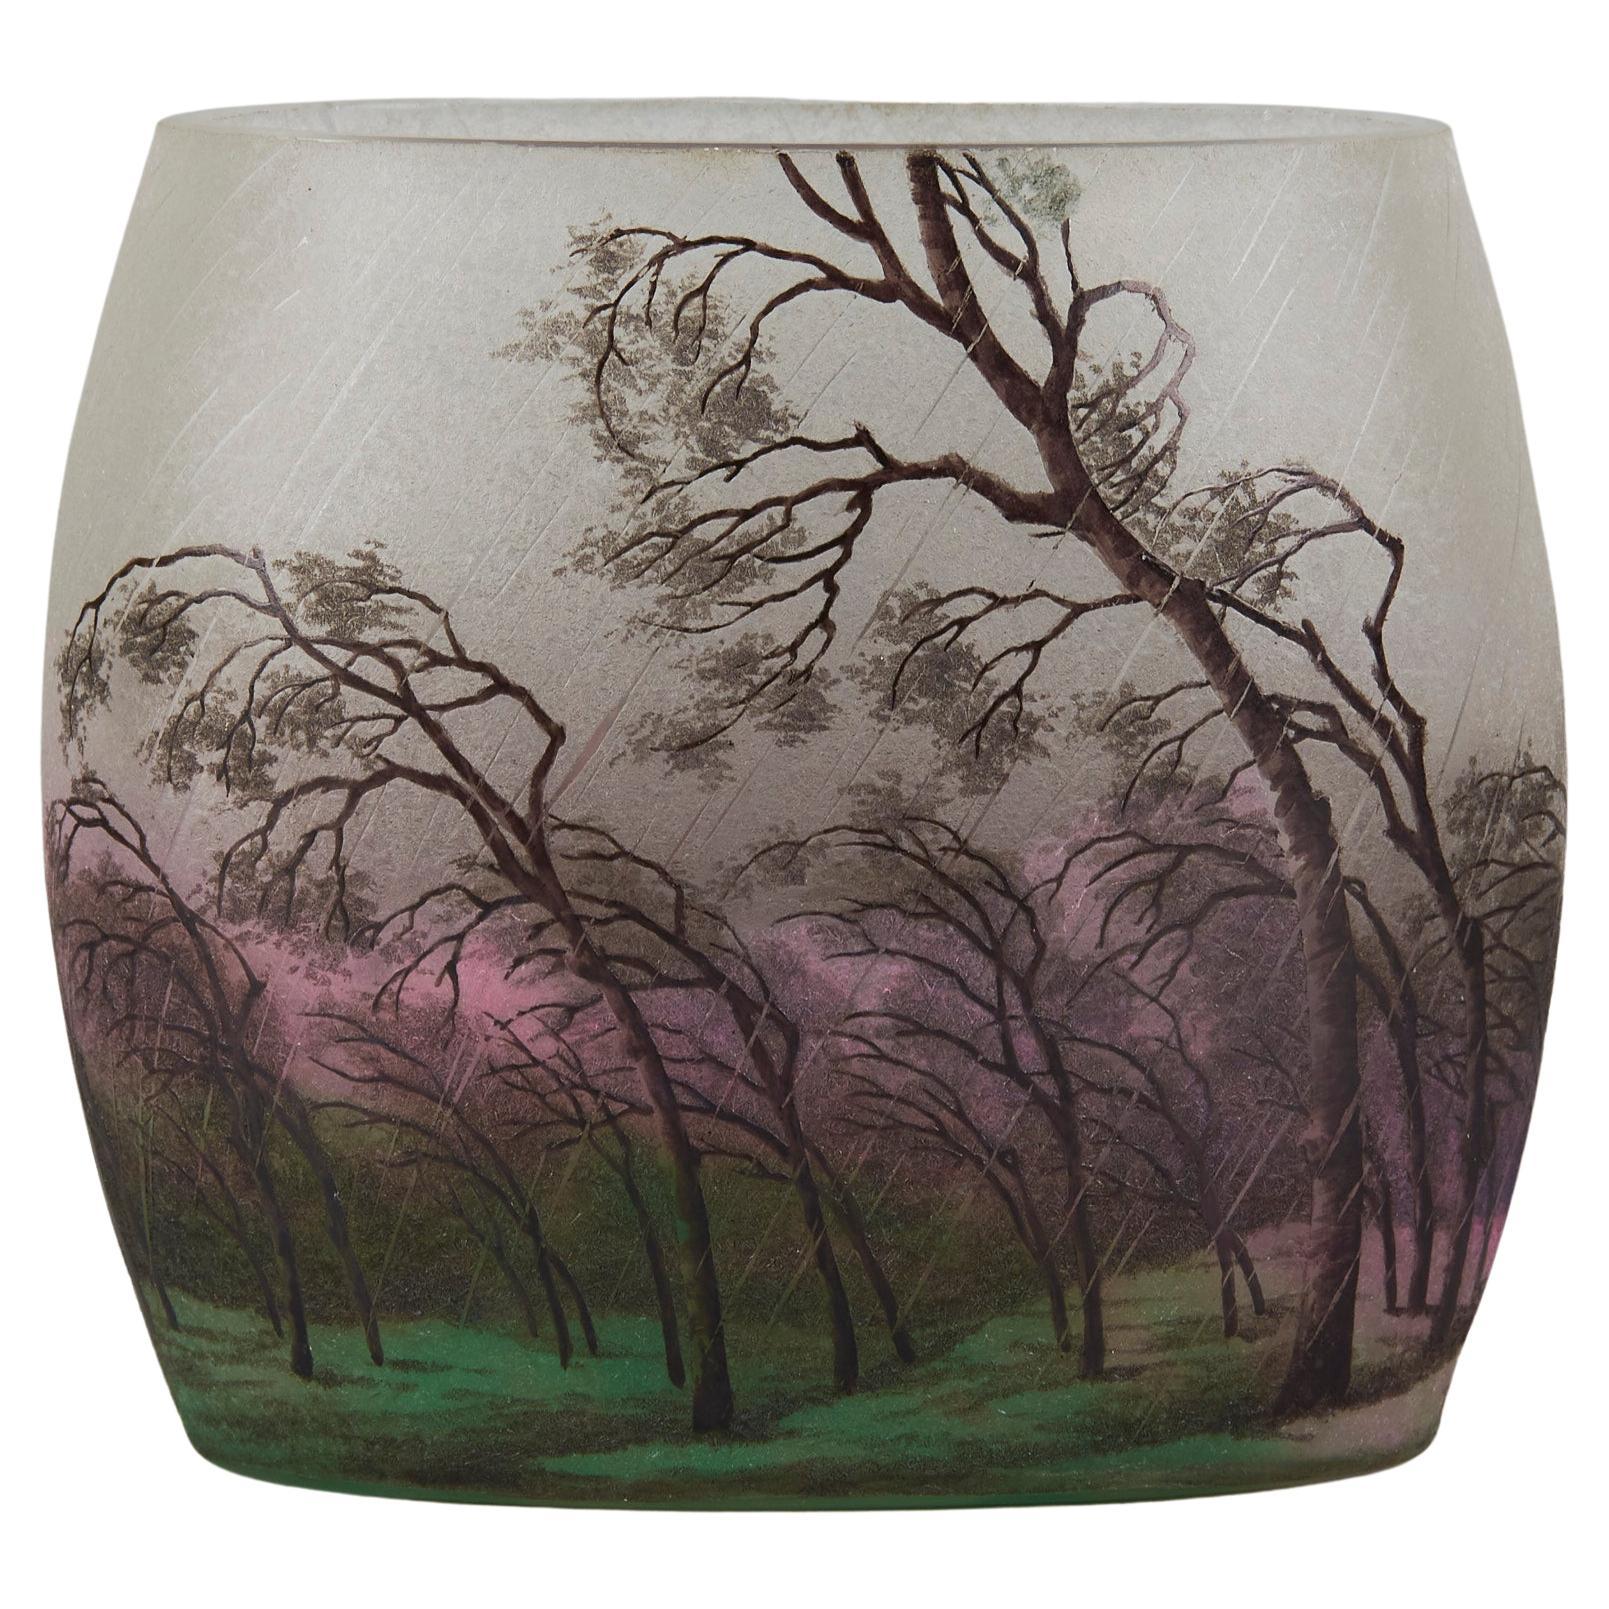 Early 20th Century Vase Entitled "Paysage Pluie" Vase by Daum Frères, circa 1900 For Sale